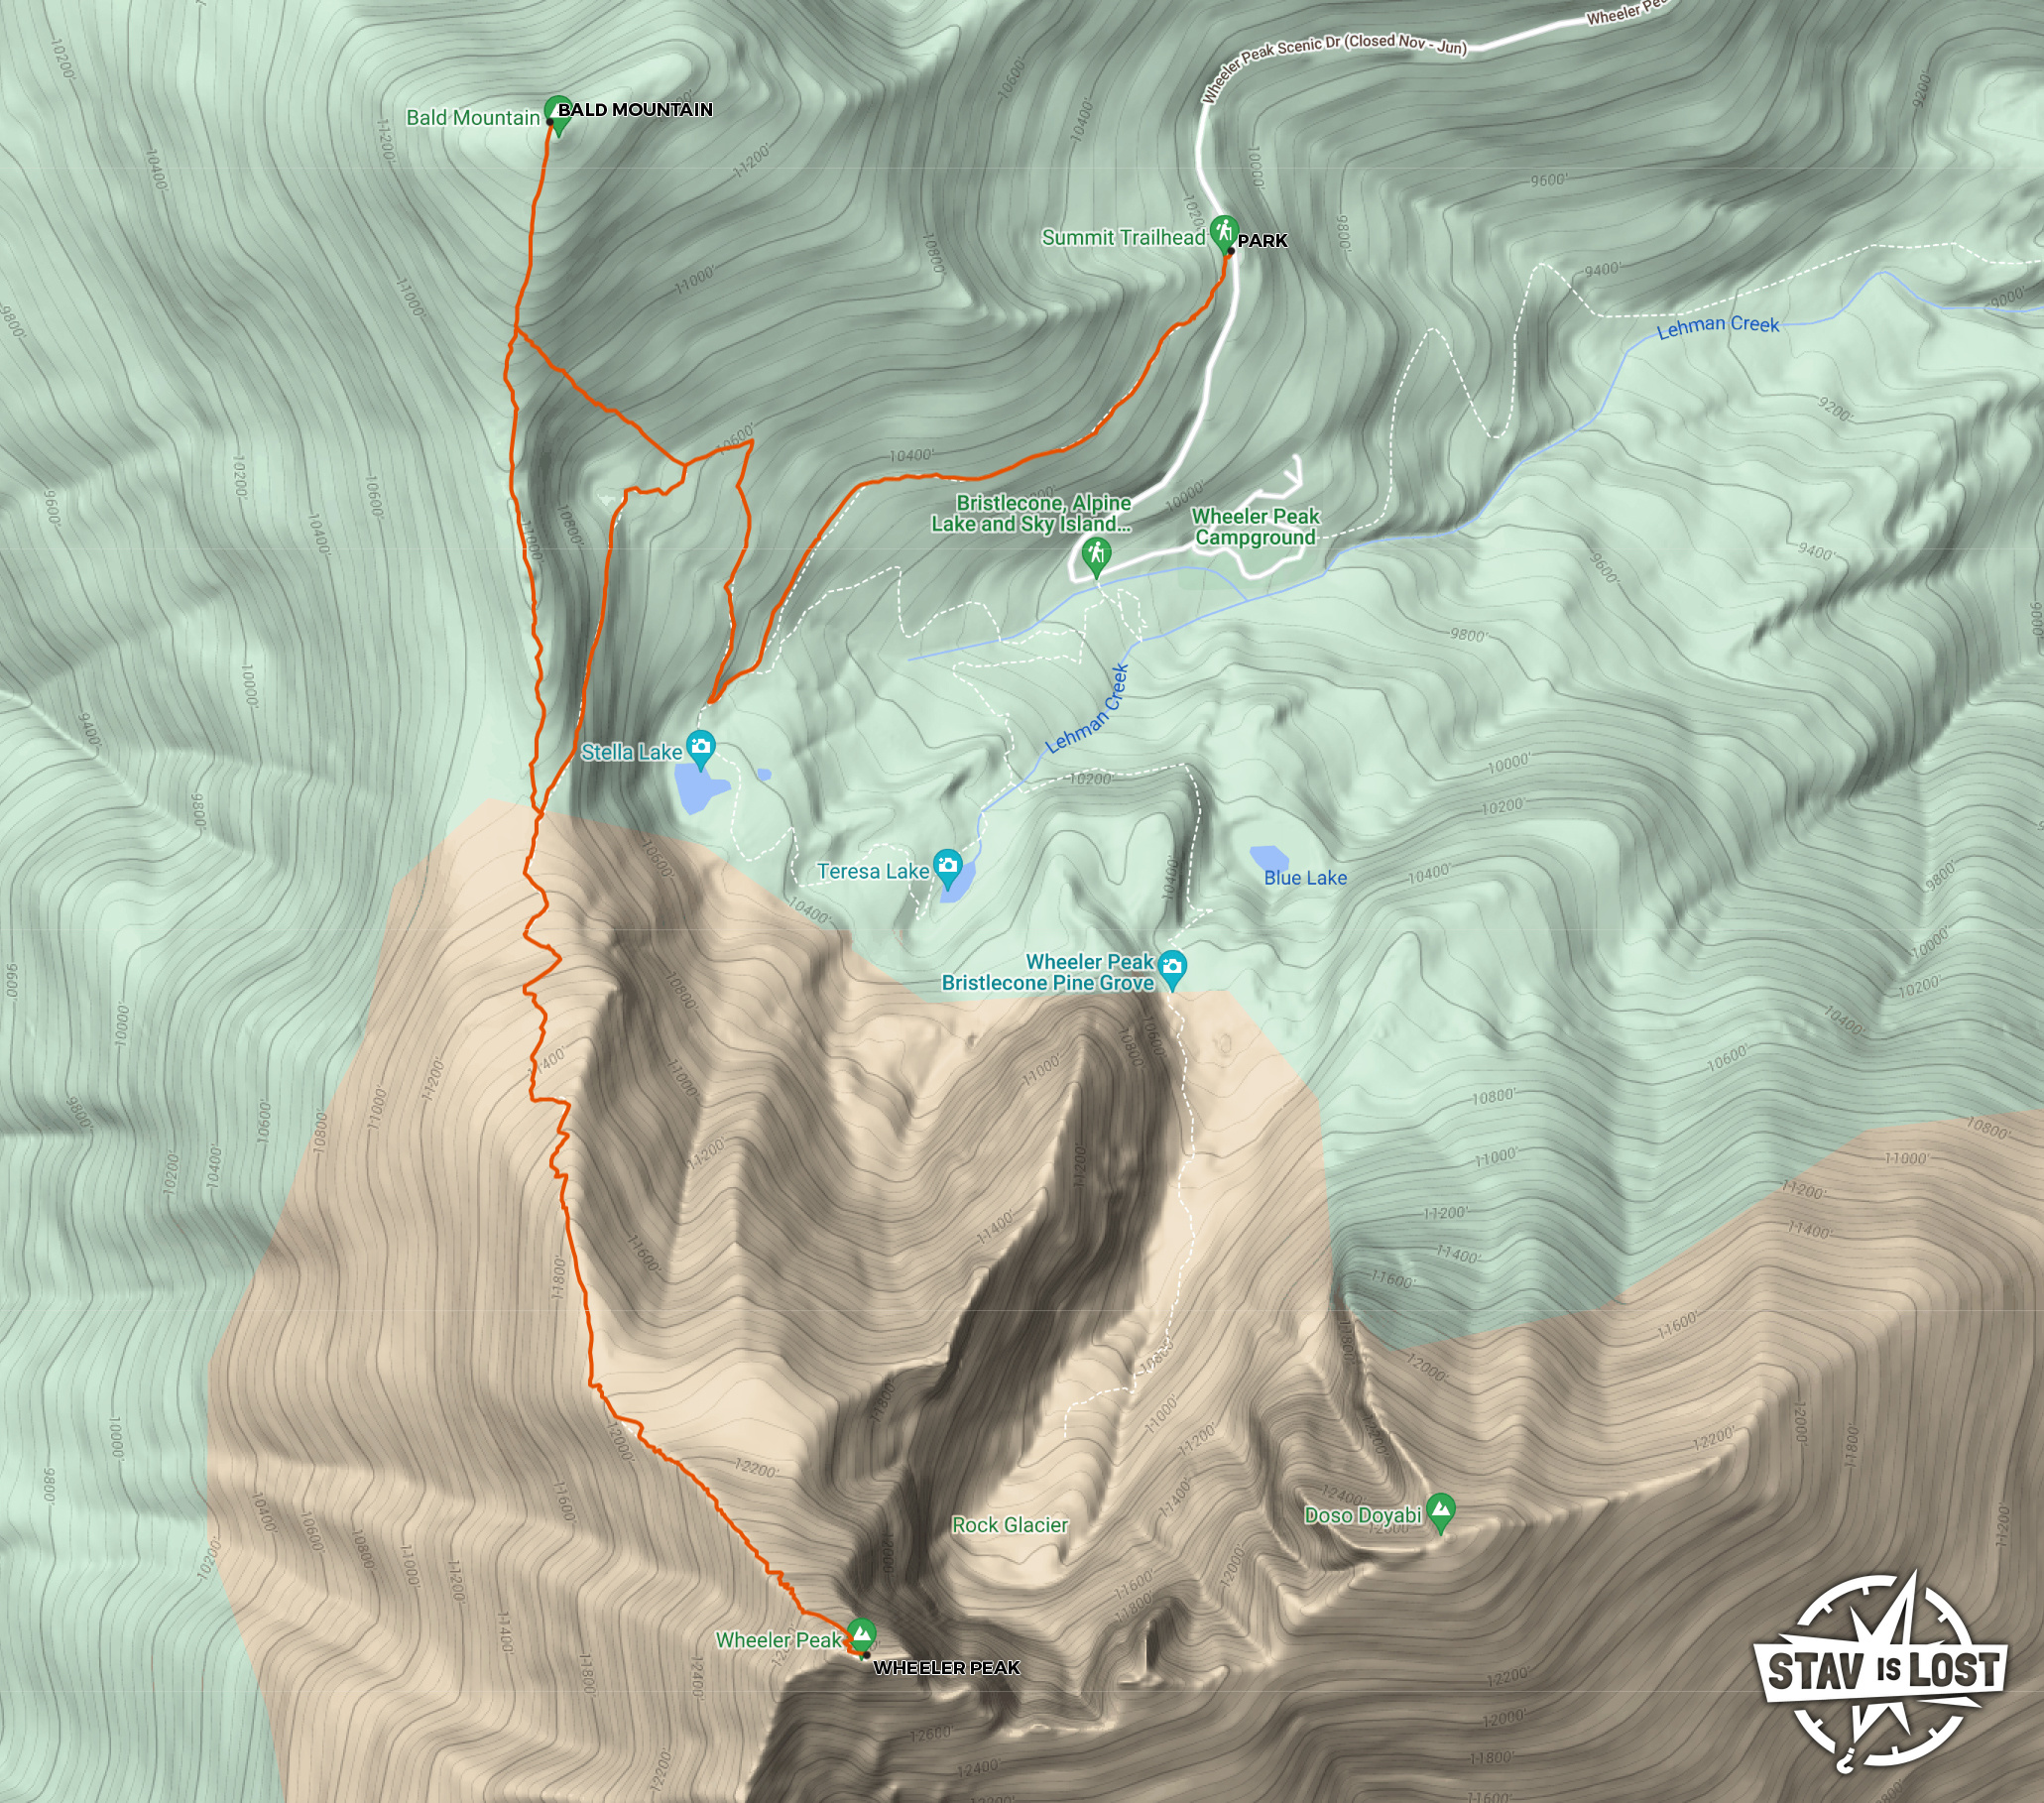 map for Wheeler Peak and Bald Mountain by stav is lost